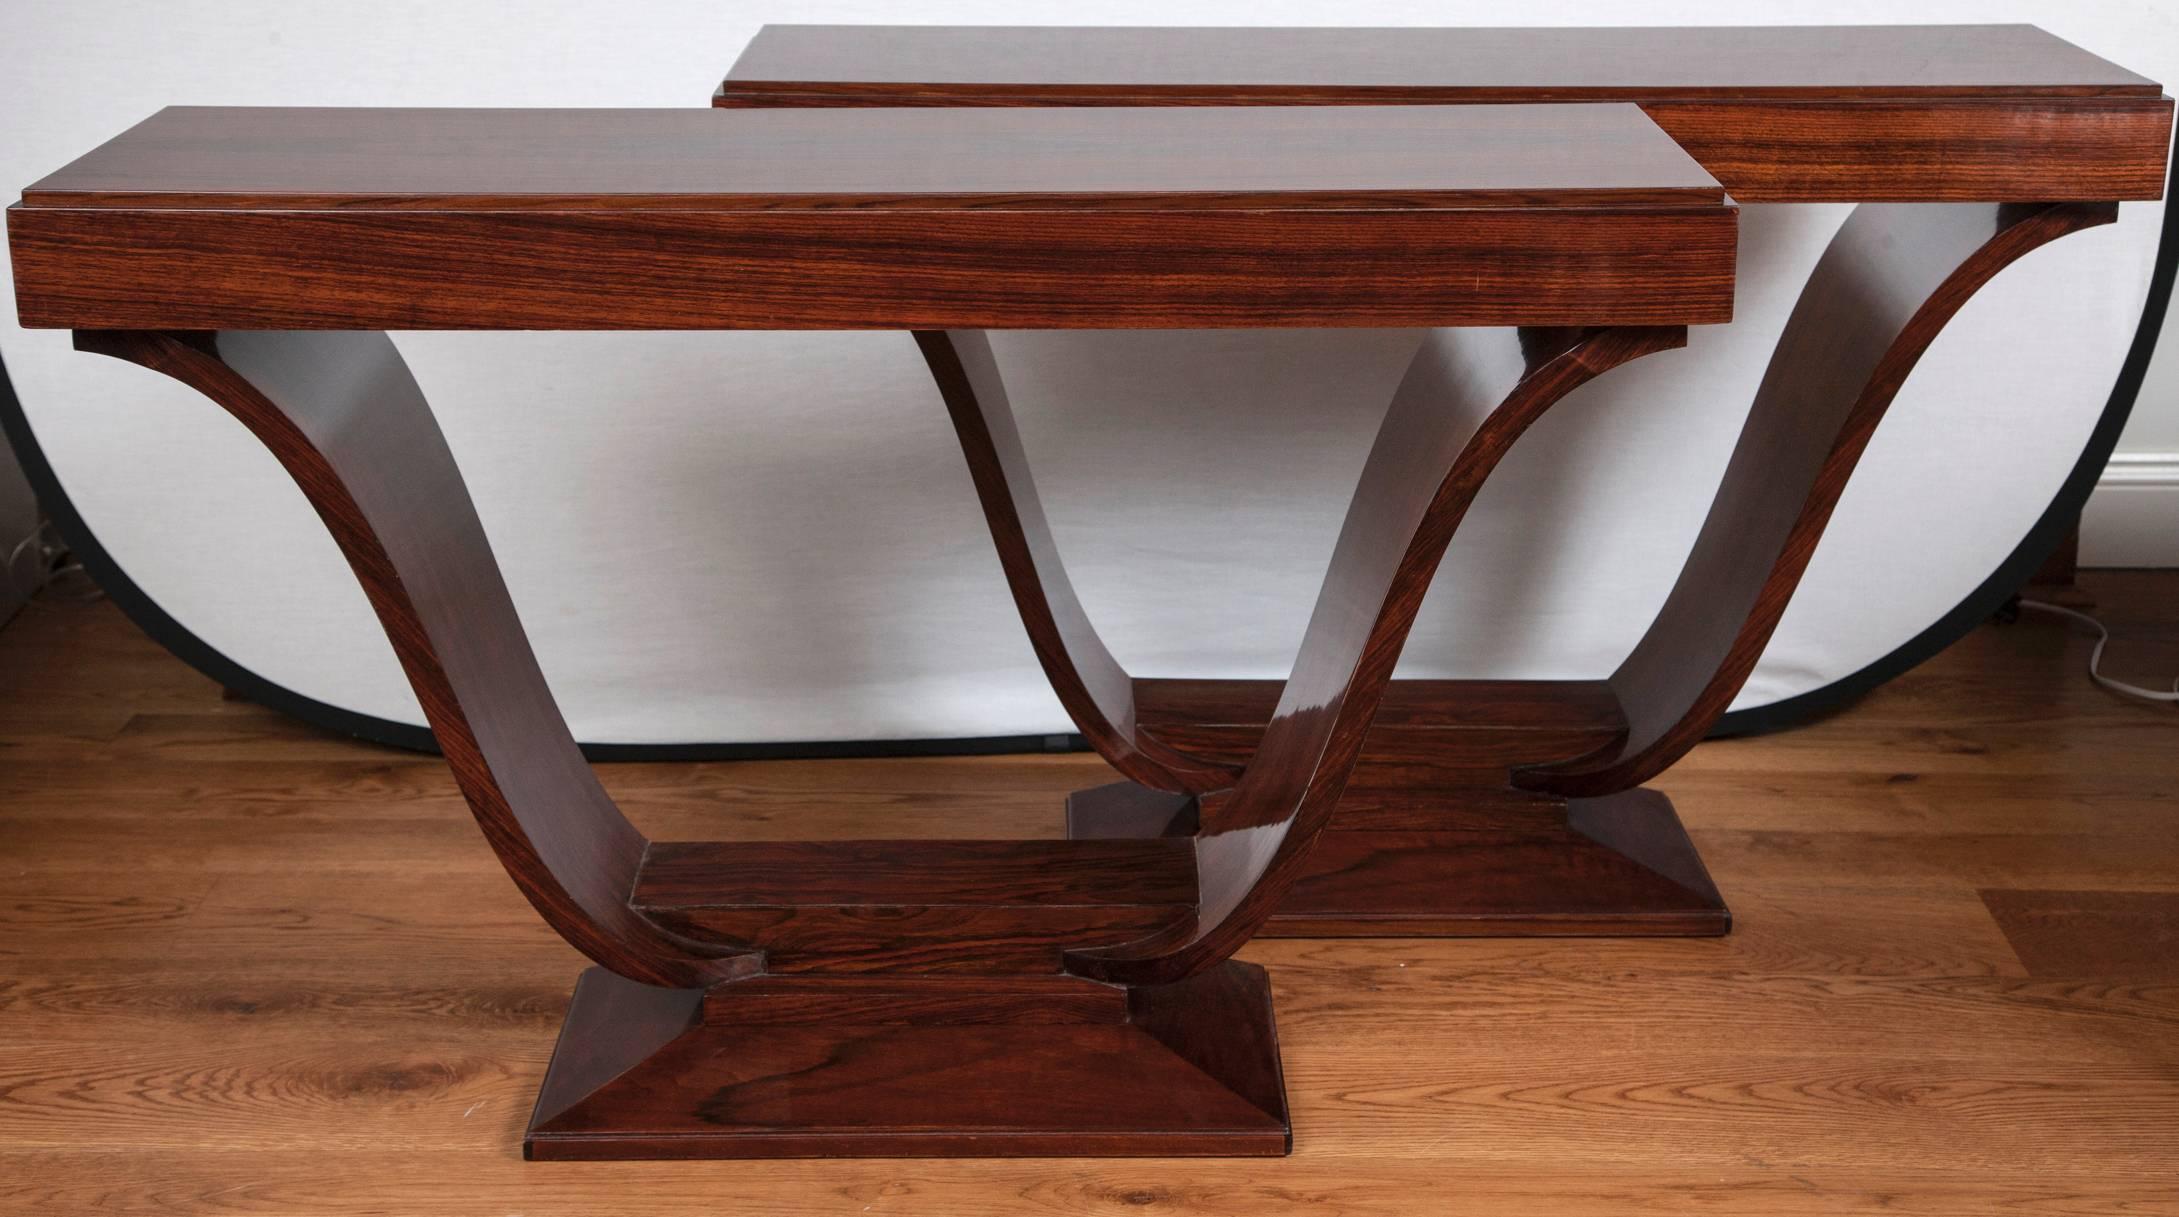 Elegant form defines these Art Deco tables with stepped rectangular shaped plateau on tulip shaped bases in rosewood veneer, recently refurbished and sizes modified, circa 1920.